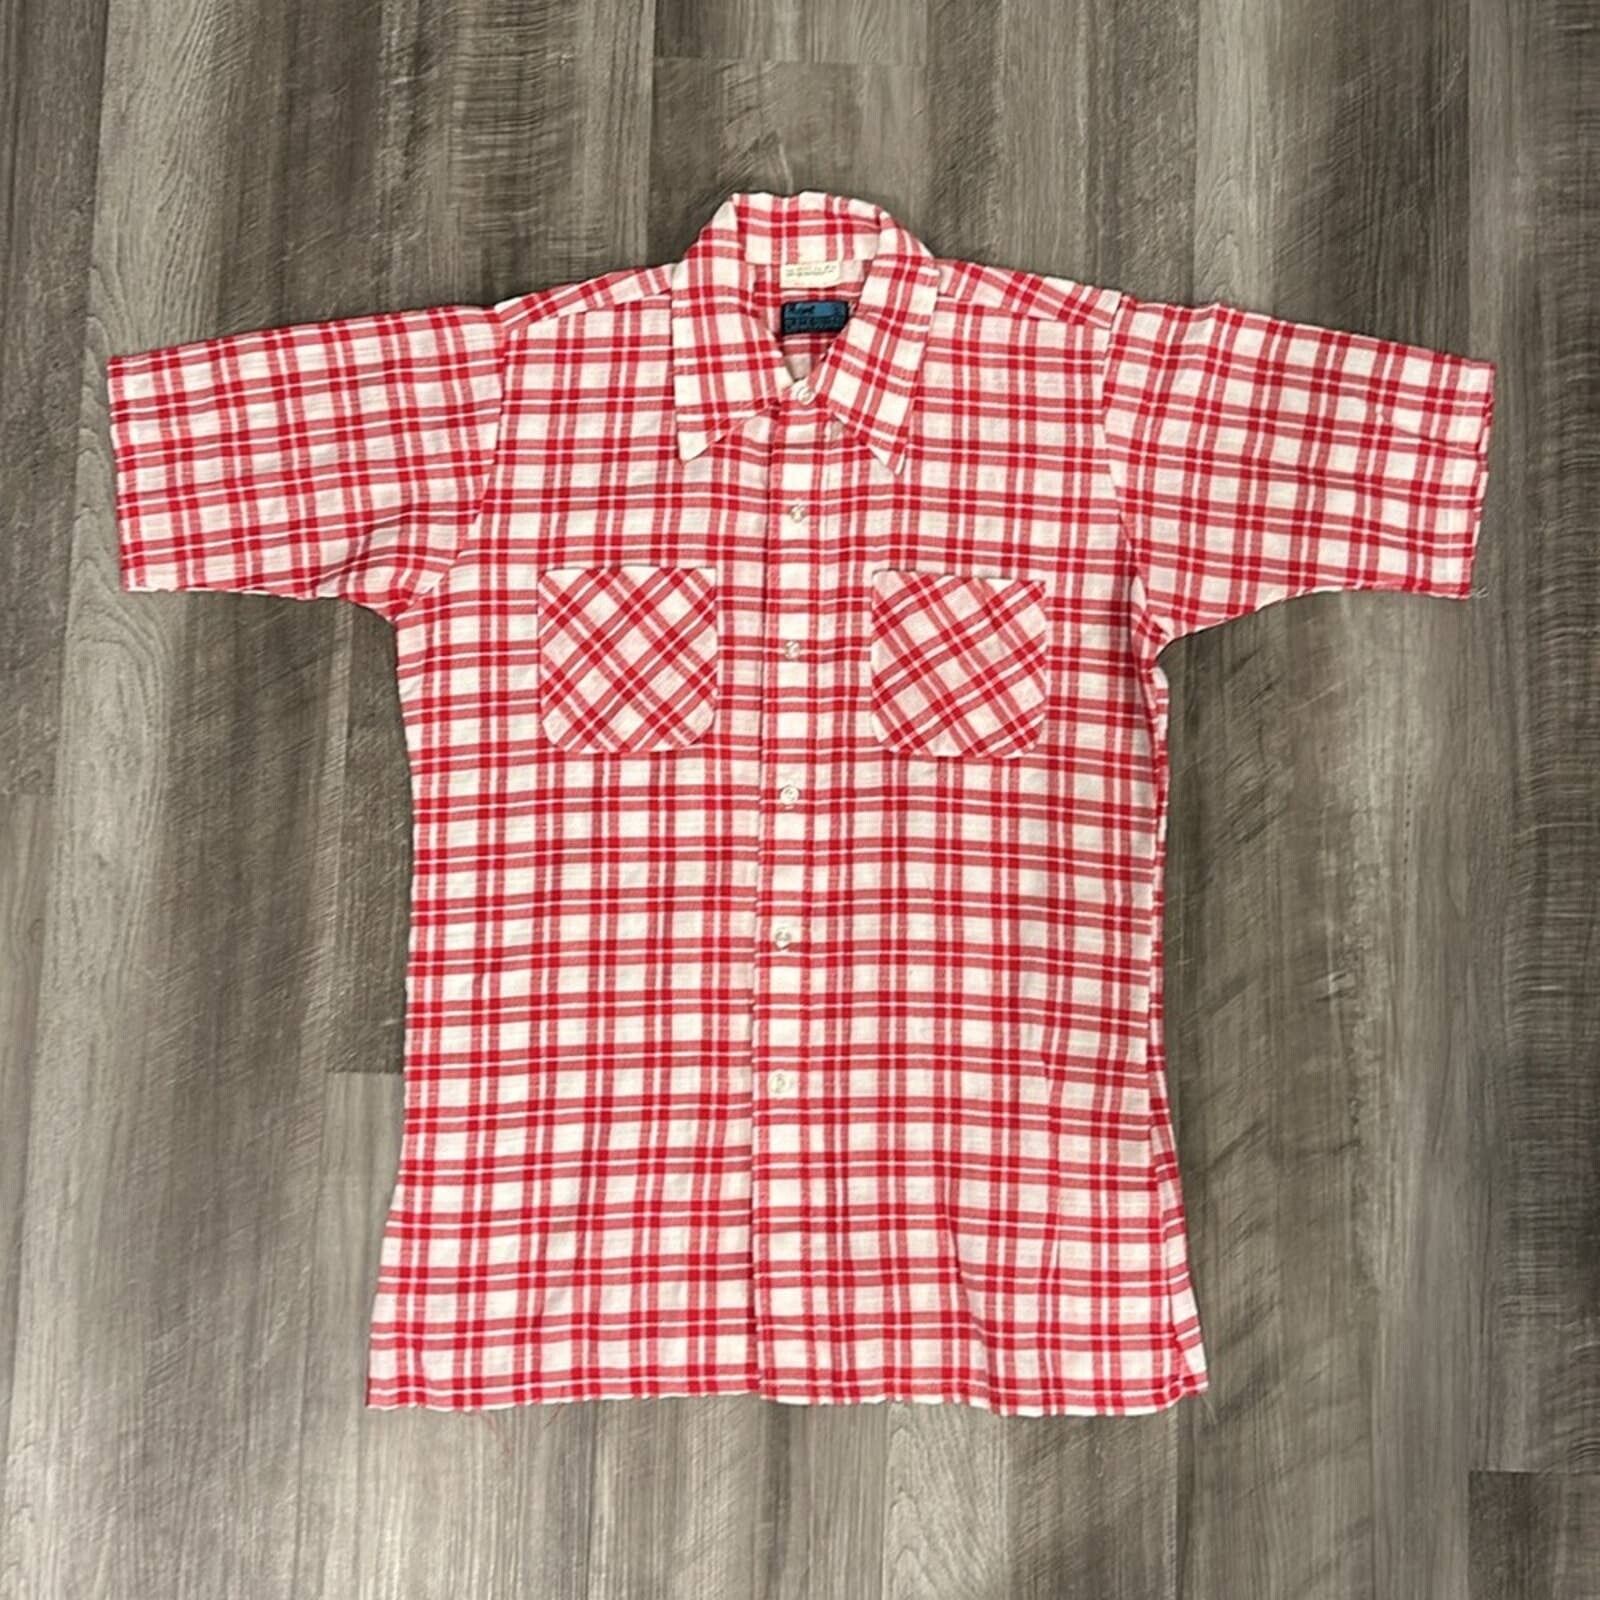 1 Plaza Square by Ely and Walker Western Short Sleeve Size US S / EU 44-46 / 1 - 2 Preview